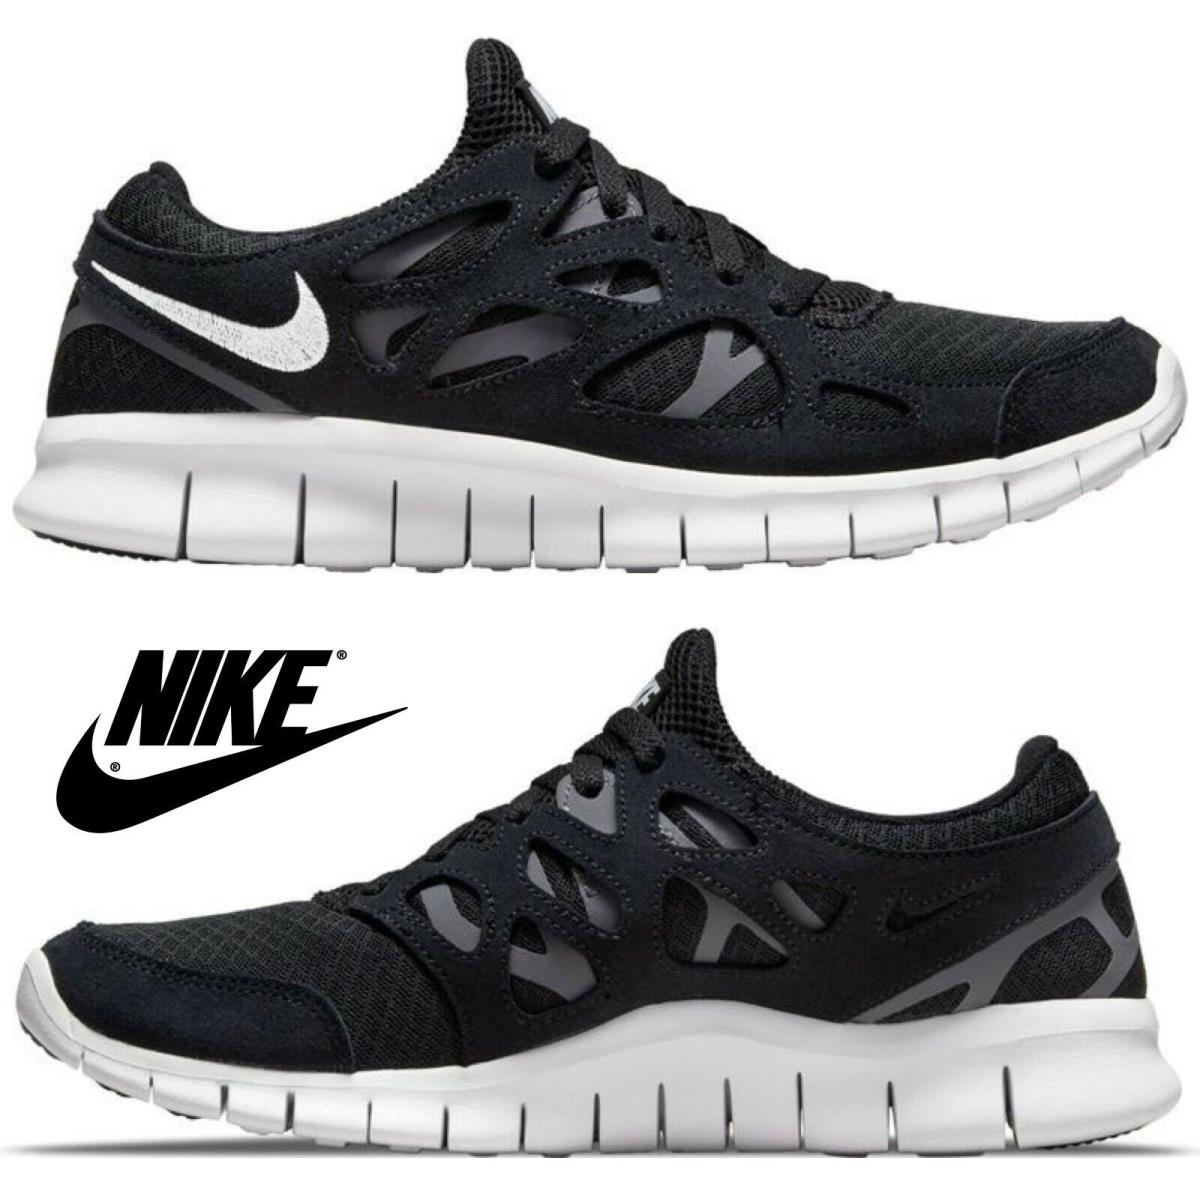 Nike Men`s Free Run 2 Shoes Running Training Athletic Sport Casual Sneakers